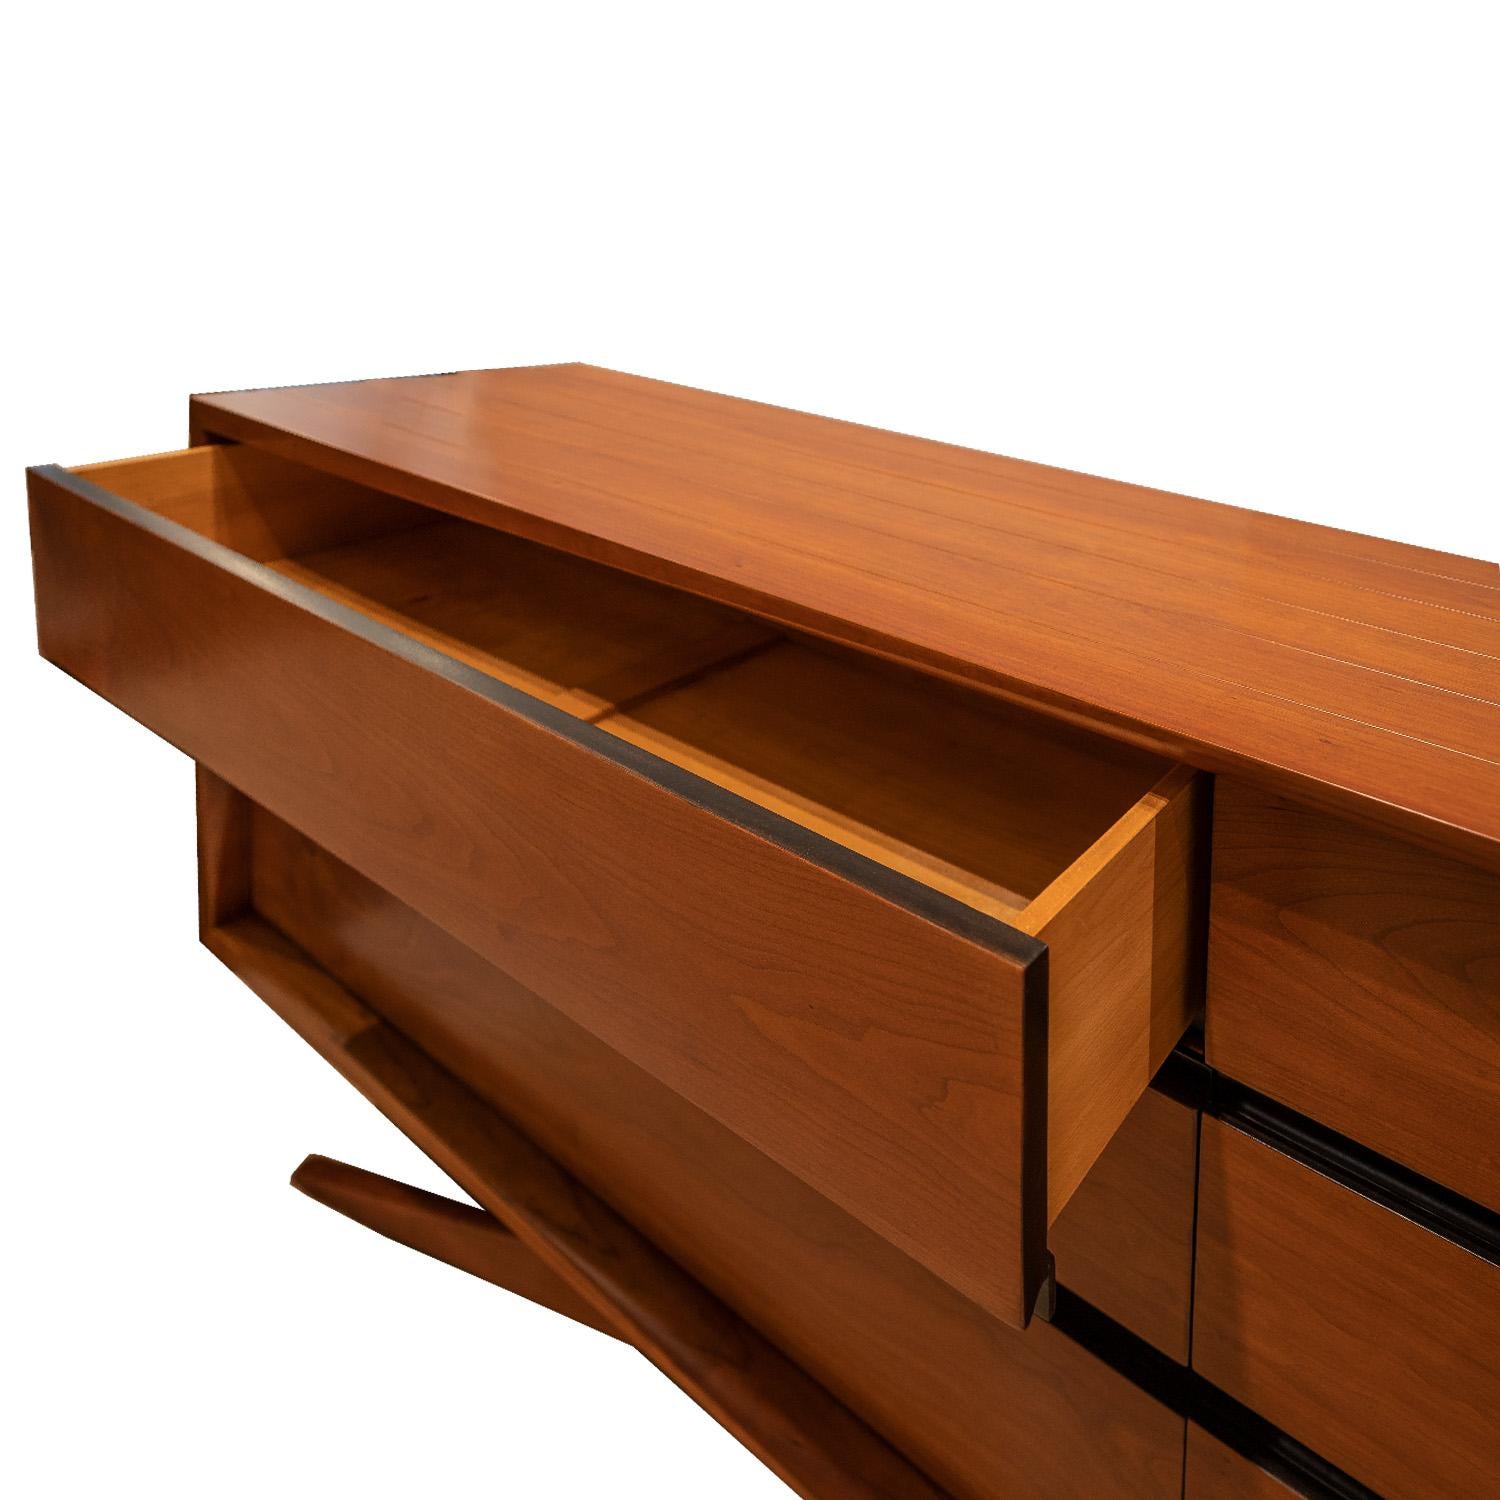 Hand-Crafted Vladimir Kagan Rare and Iconic Large Chest of Drawers in Walnut, 1950s